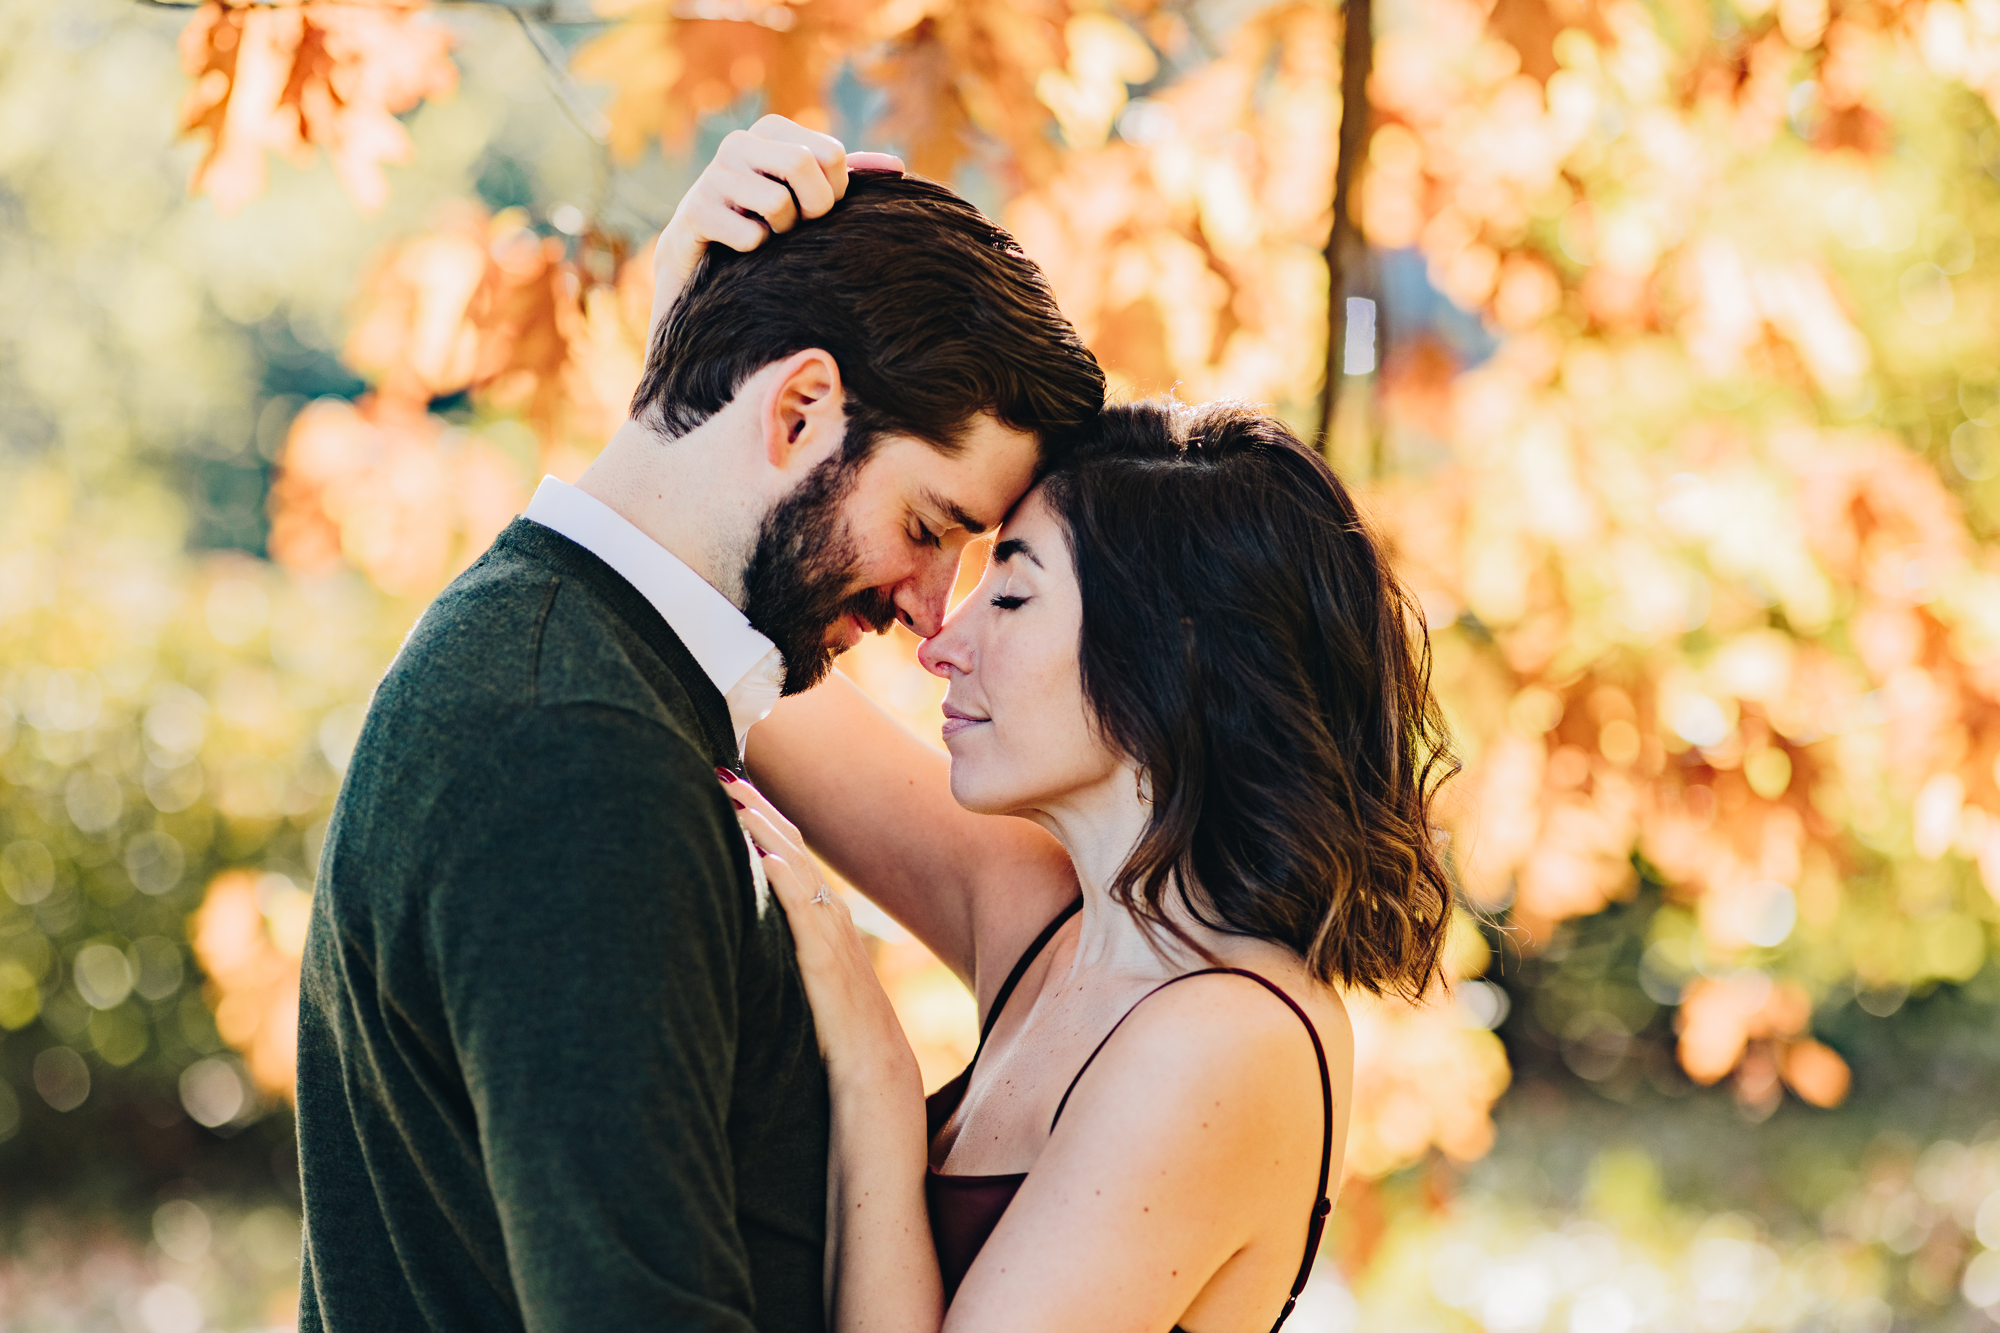 Cinematic NYC Engagement photo locations and ideas